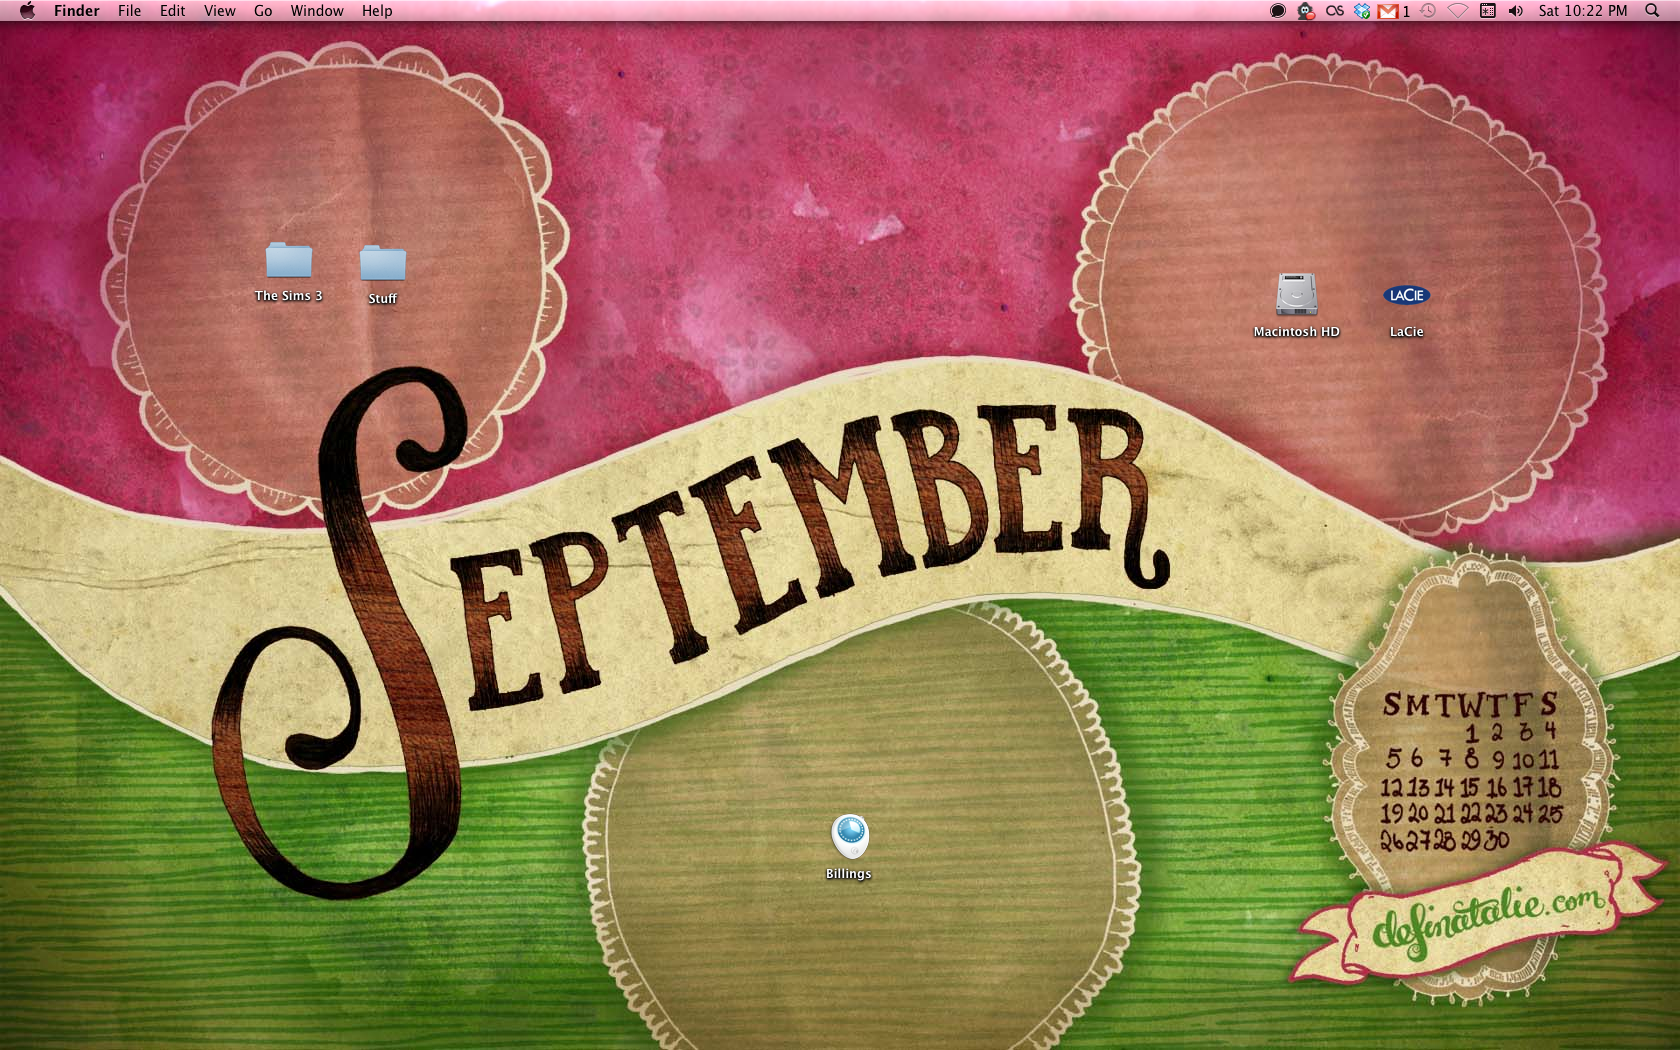 Desktop wallpaper in watermelon colours, with a hand lettered "September" across the middle.